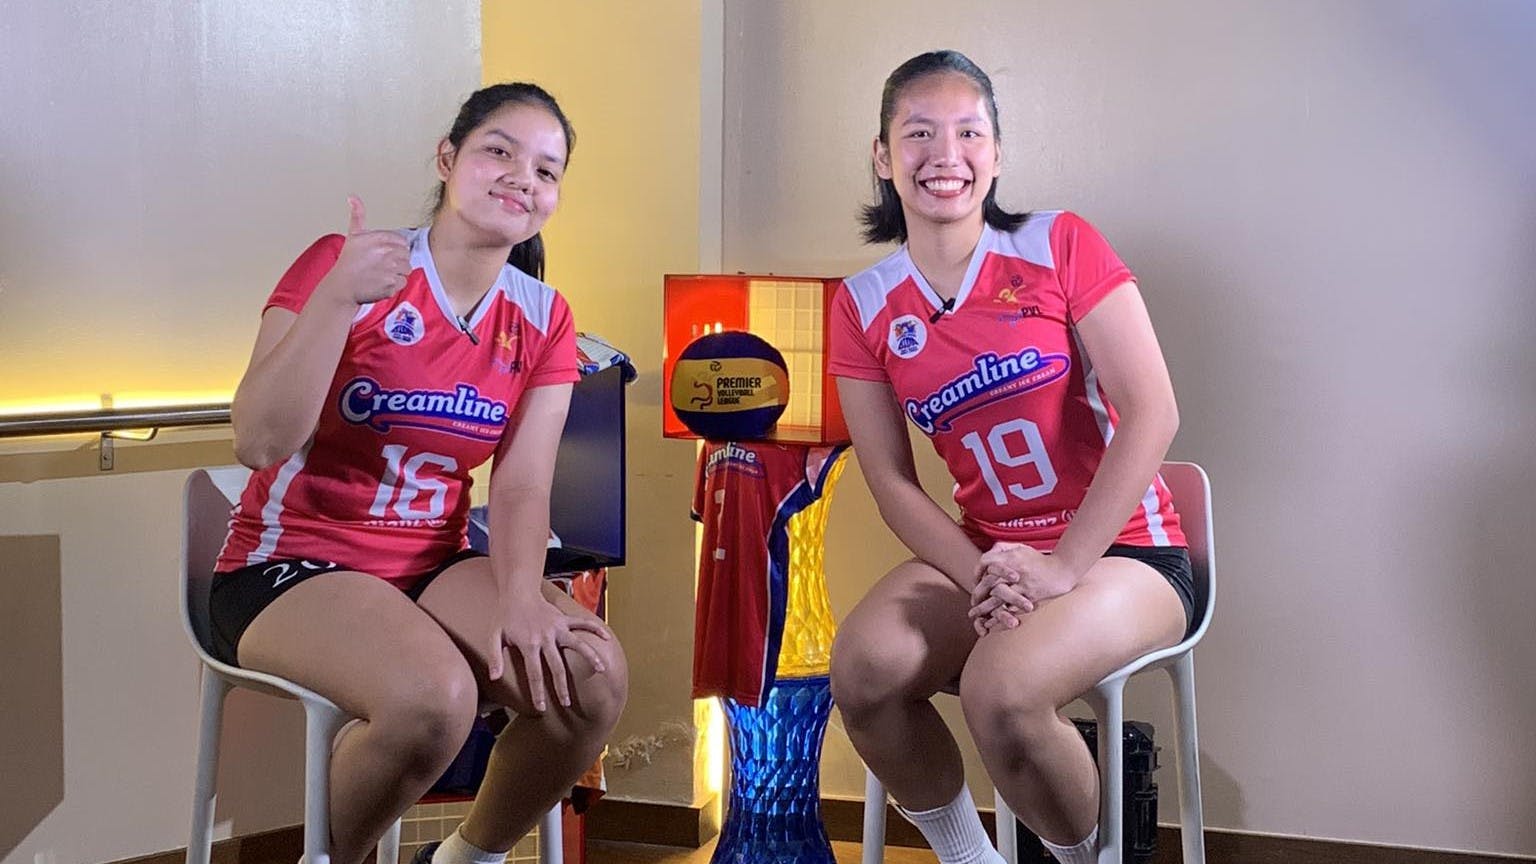 Young playmakers: Bea Bonafe, Mafe Galanza reveal lessons learned from Creamline ates